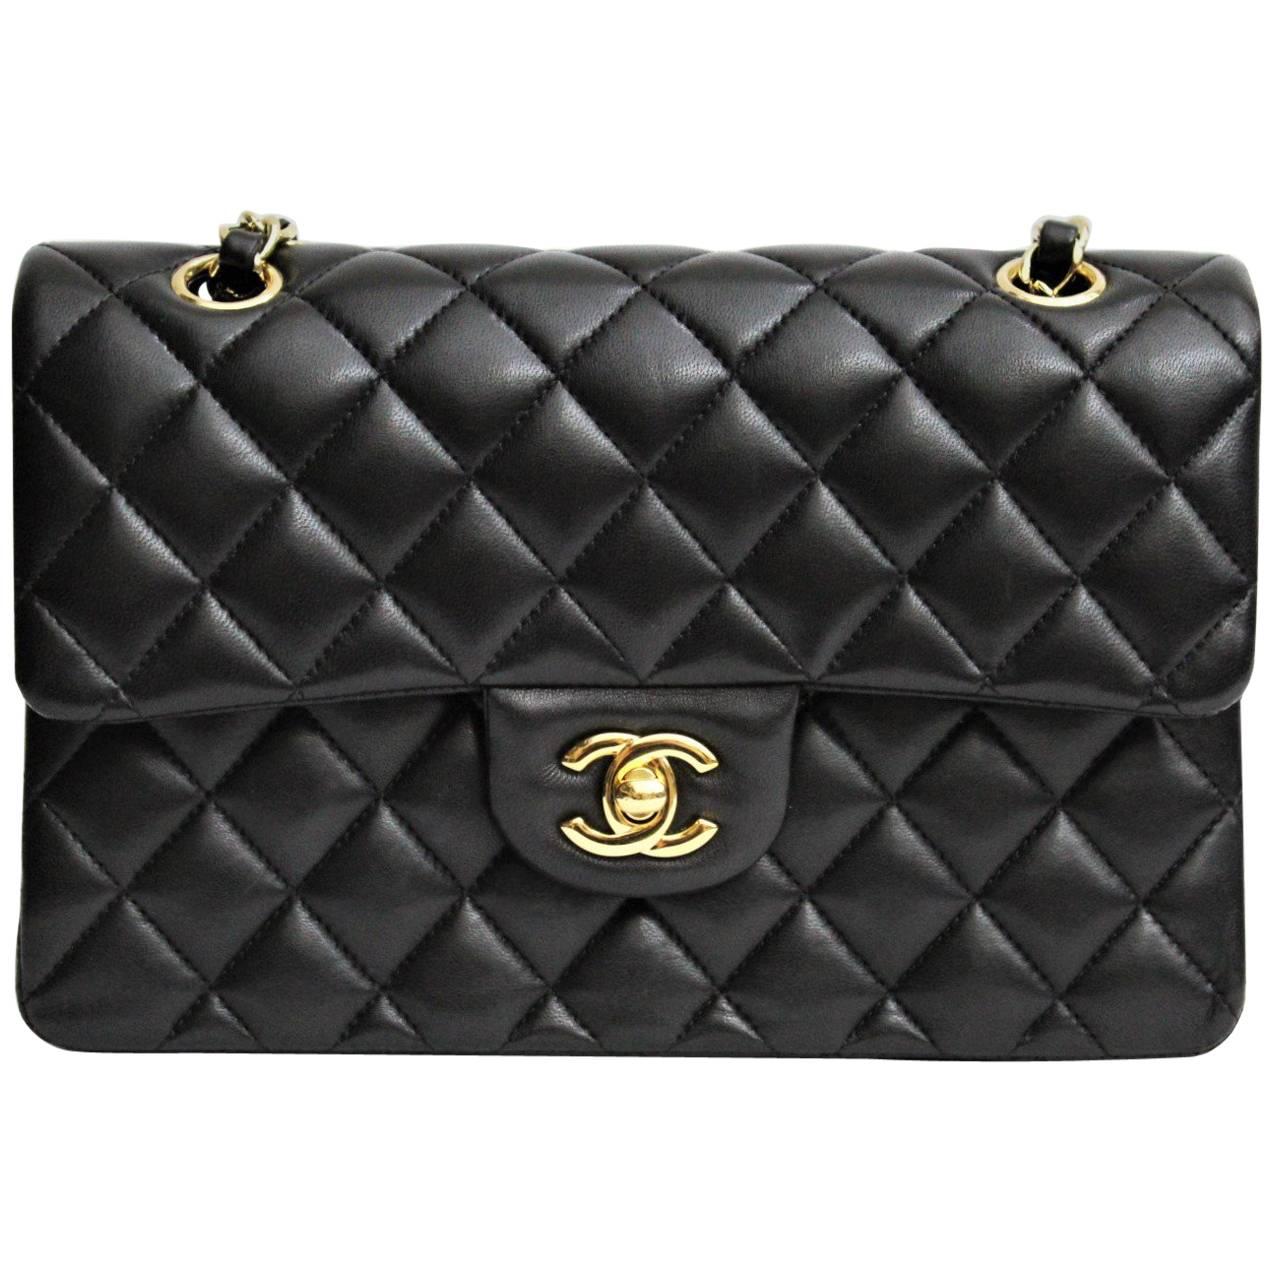 Chanel Black Leather Classic 2.55 Bag